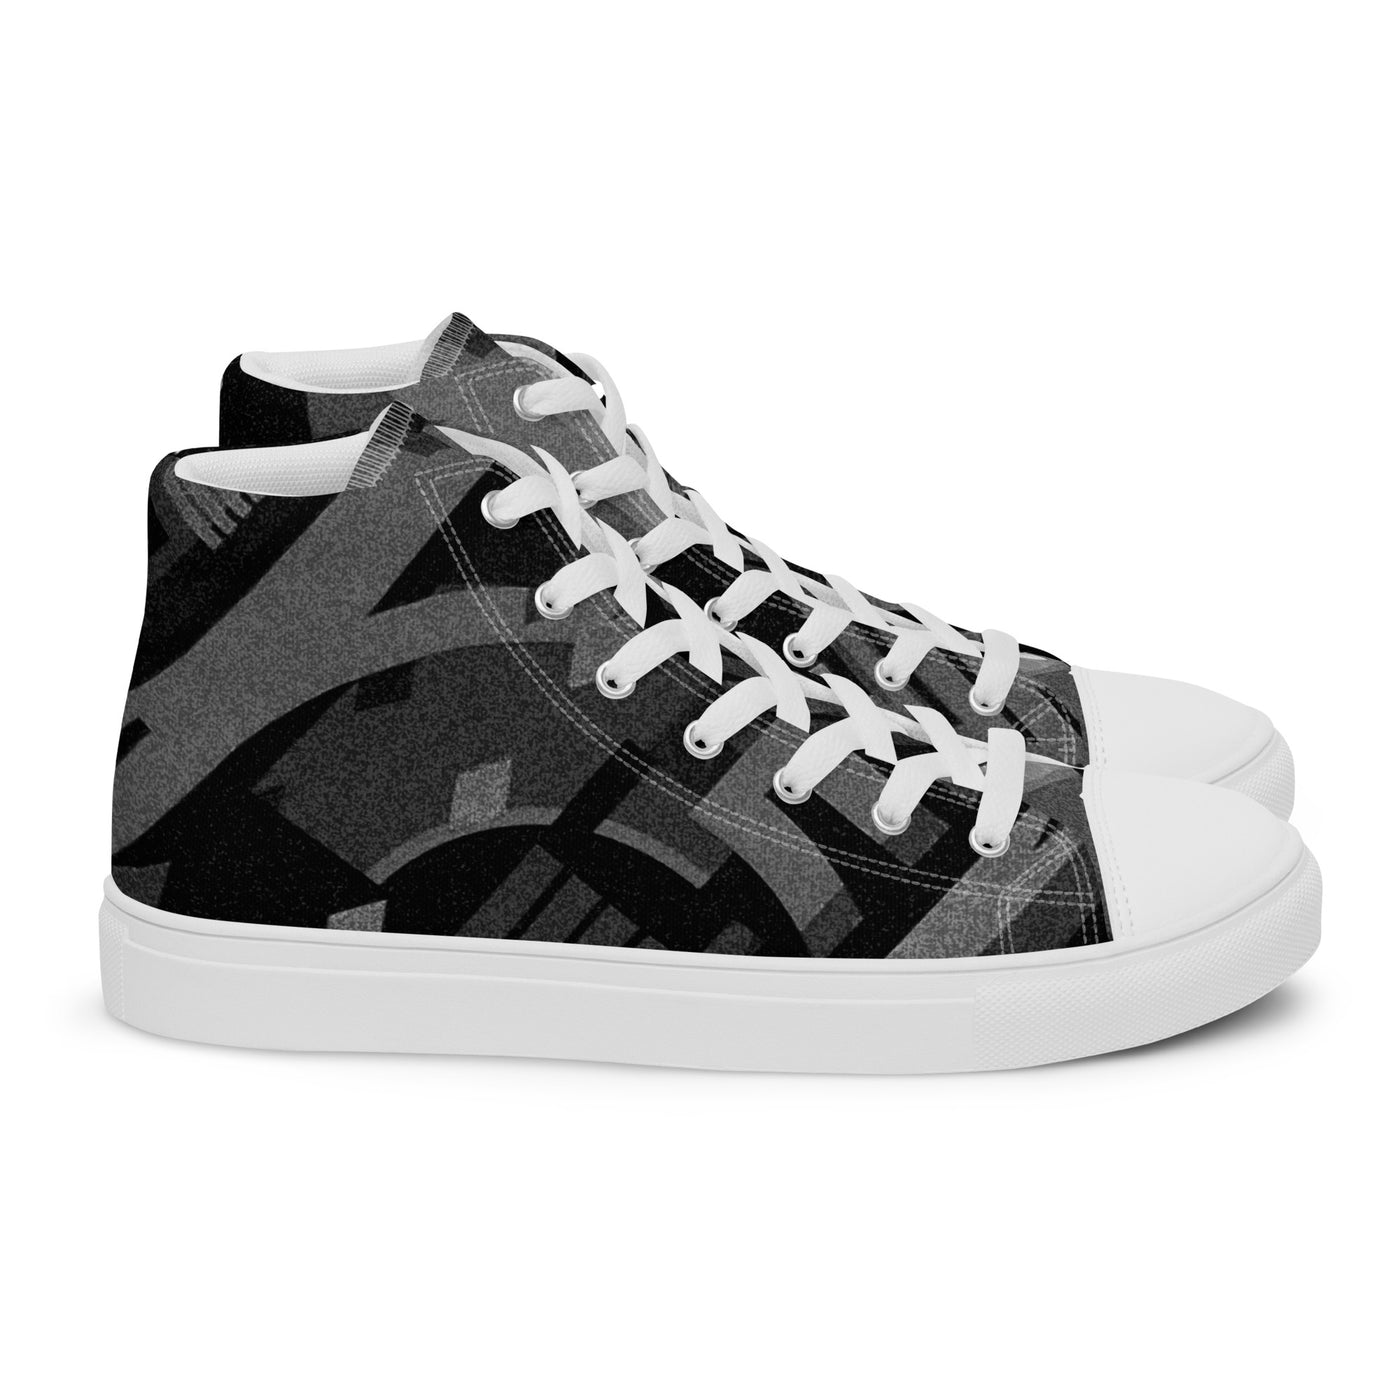 TechAbstract 1 Black & White - Men's High Top Canvas Shoes